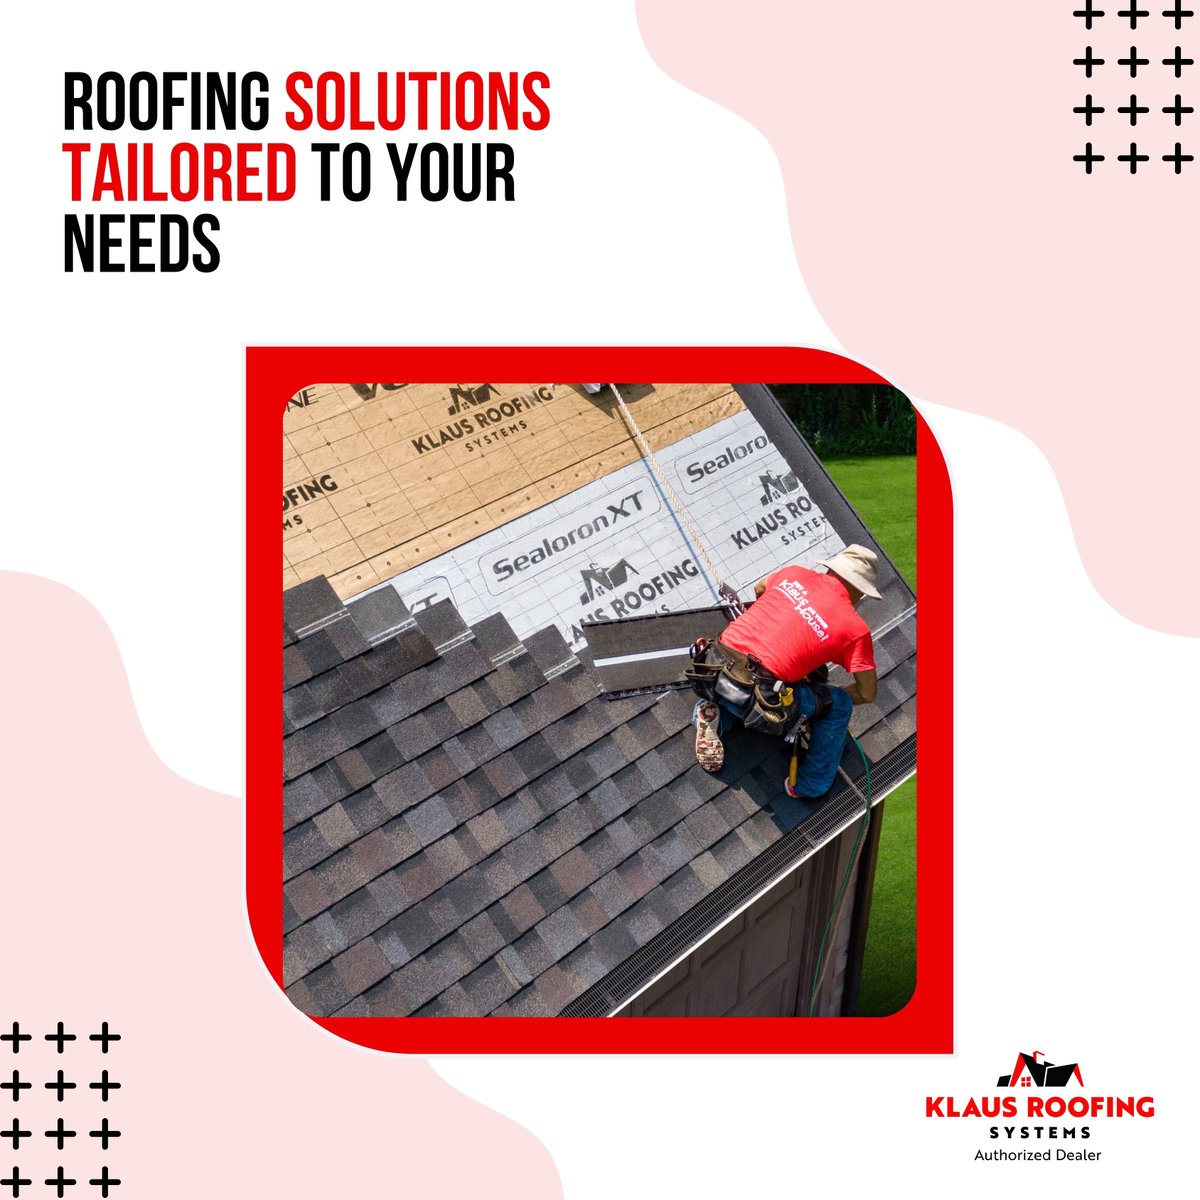 🛠️ At Klaus Roofing Systems of WNY, we understand that every home is unique. That's why we offer customized roofing solutions tailored to your specific needs and preferences.
--
🌐 krsofwny.com

#KlausRoofing
#RoofingSolutions
#HomeRenovation
#StormDamageRepair